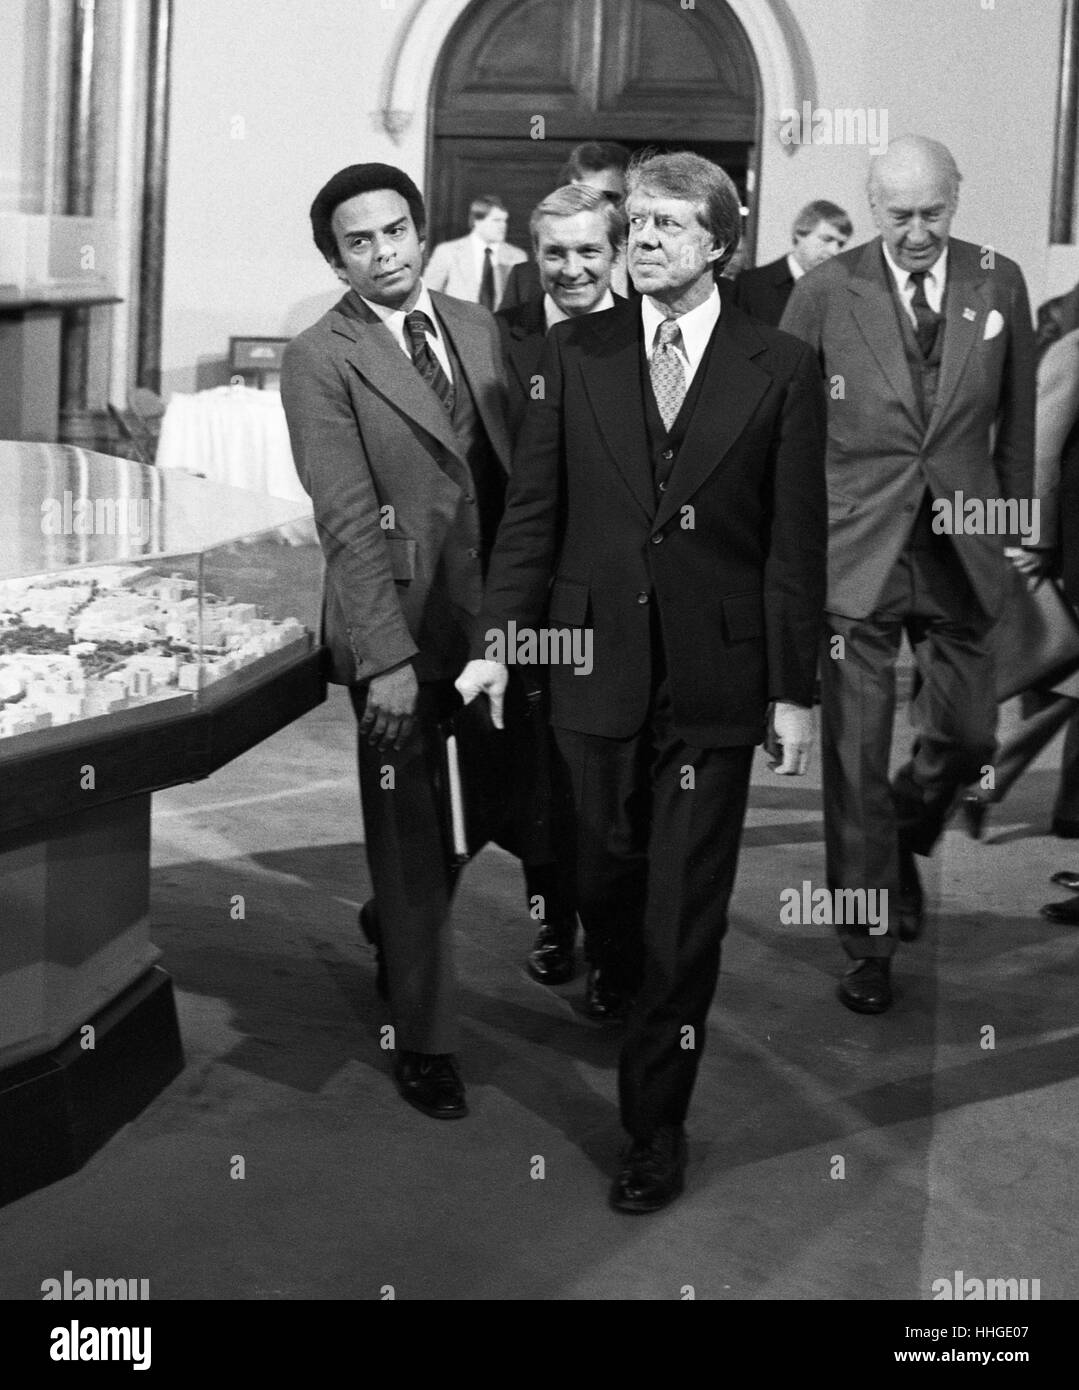 President Jimmy Carter flanked by his Ambassador to the United Nations, Andrew J. Young (left), walk into a meeting at The Smithsonian Institution's Castle building in 1977. Stock Photo